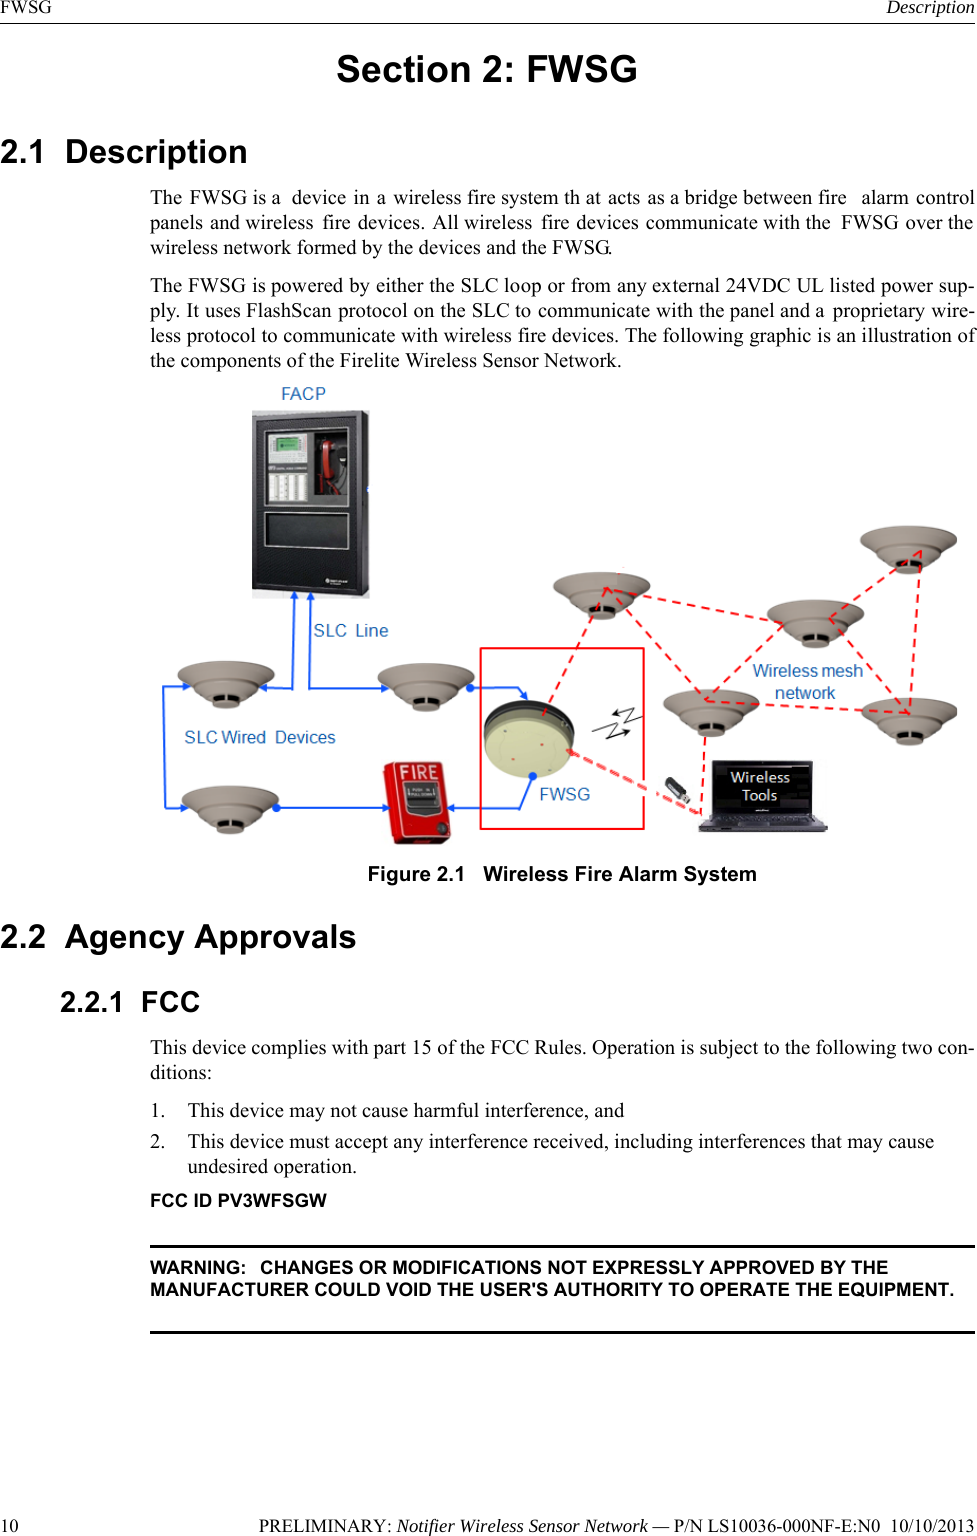 10 PRELIMINARY: Notifier Wireless Sensor Network — P/N LS10036-000NF-E:N0  10/10/2013FWSG DescriptionSection 2: FWSG2.1  Description The FWSG is a  device in a wireless fire system th at acts as a bridge between fire  alarm controlpanels and wireless fire devices. All wireless fire devices communicate with the  FWSG over thewireless network formed by the devices and the FWSG.The FWSG is powered by either the SLC loop or from any external 24VDC UL listed power sup-ply. It uses FlashScan protocol on the SLC to communicate with the panel and a  proprietary wire-less protocol to communicate with wireless fire devices. The following graphic is an illustration ofthe components of the Firelite Wireless Sensor Network.Figure 2.1   Wireless Fire Alarm System 2.2  Agency Approvals2.2.1  FCCThis device complies with part 15 of the FCC Rules. Operation is subject to the following two con-ditions: 1. This device may not cause harmful interference, and  2. This device must accept any interference received, including interferences that may cause undesired operation.FCC ID PV3WFSGWWARNING:  CHANGES OR MODIFICATIONS NOT EXPRESSLY APPROVED BY THE MANUFACTURER COULD VOID THE USER&apos;S AUTHORITY TO OPERATE THE EQUIPMENT.